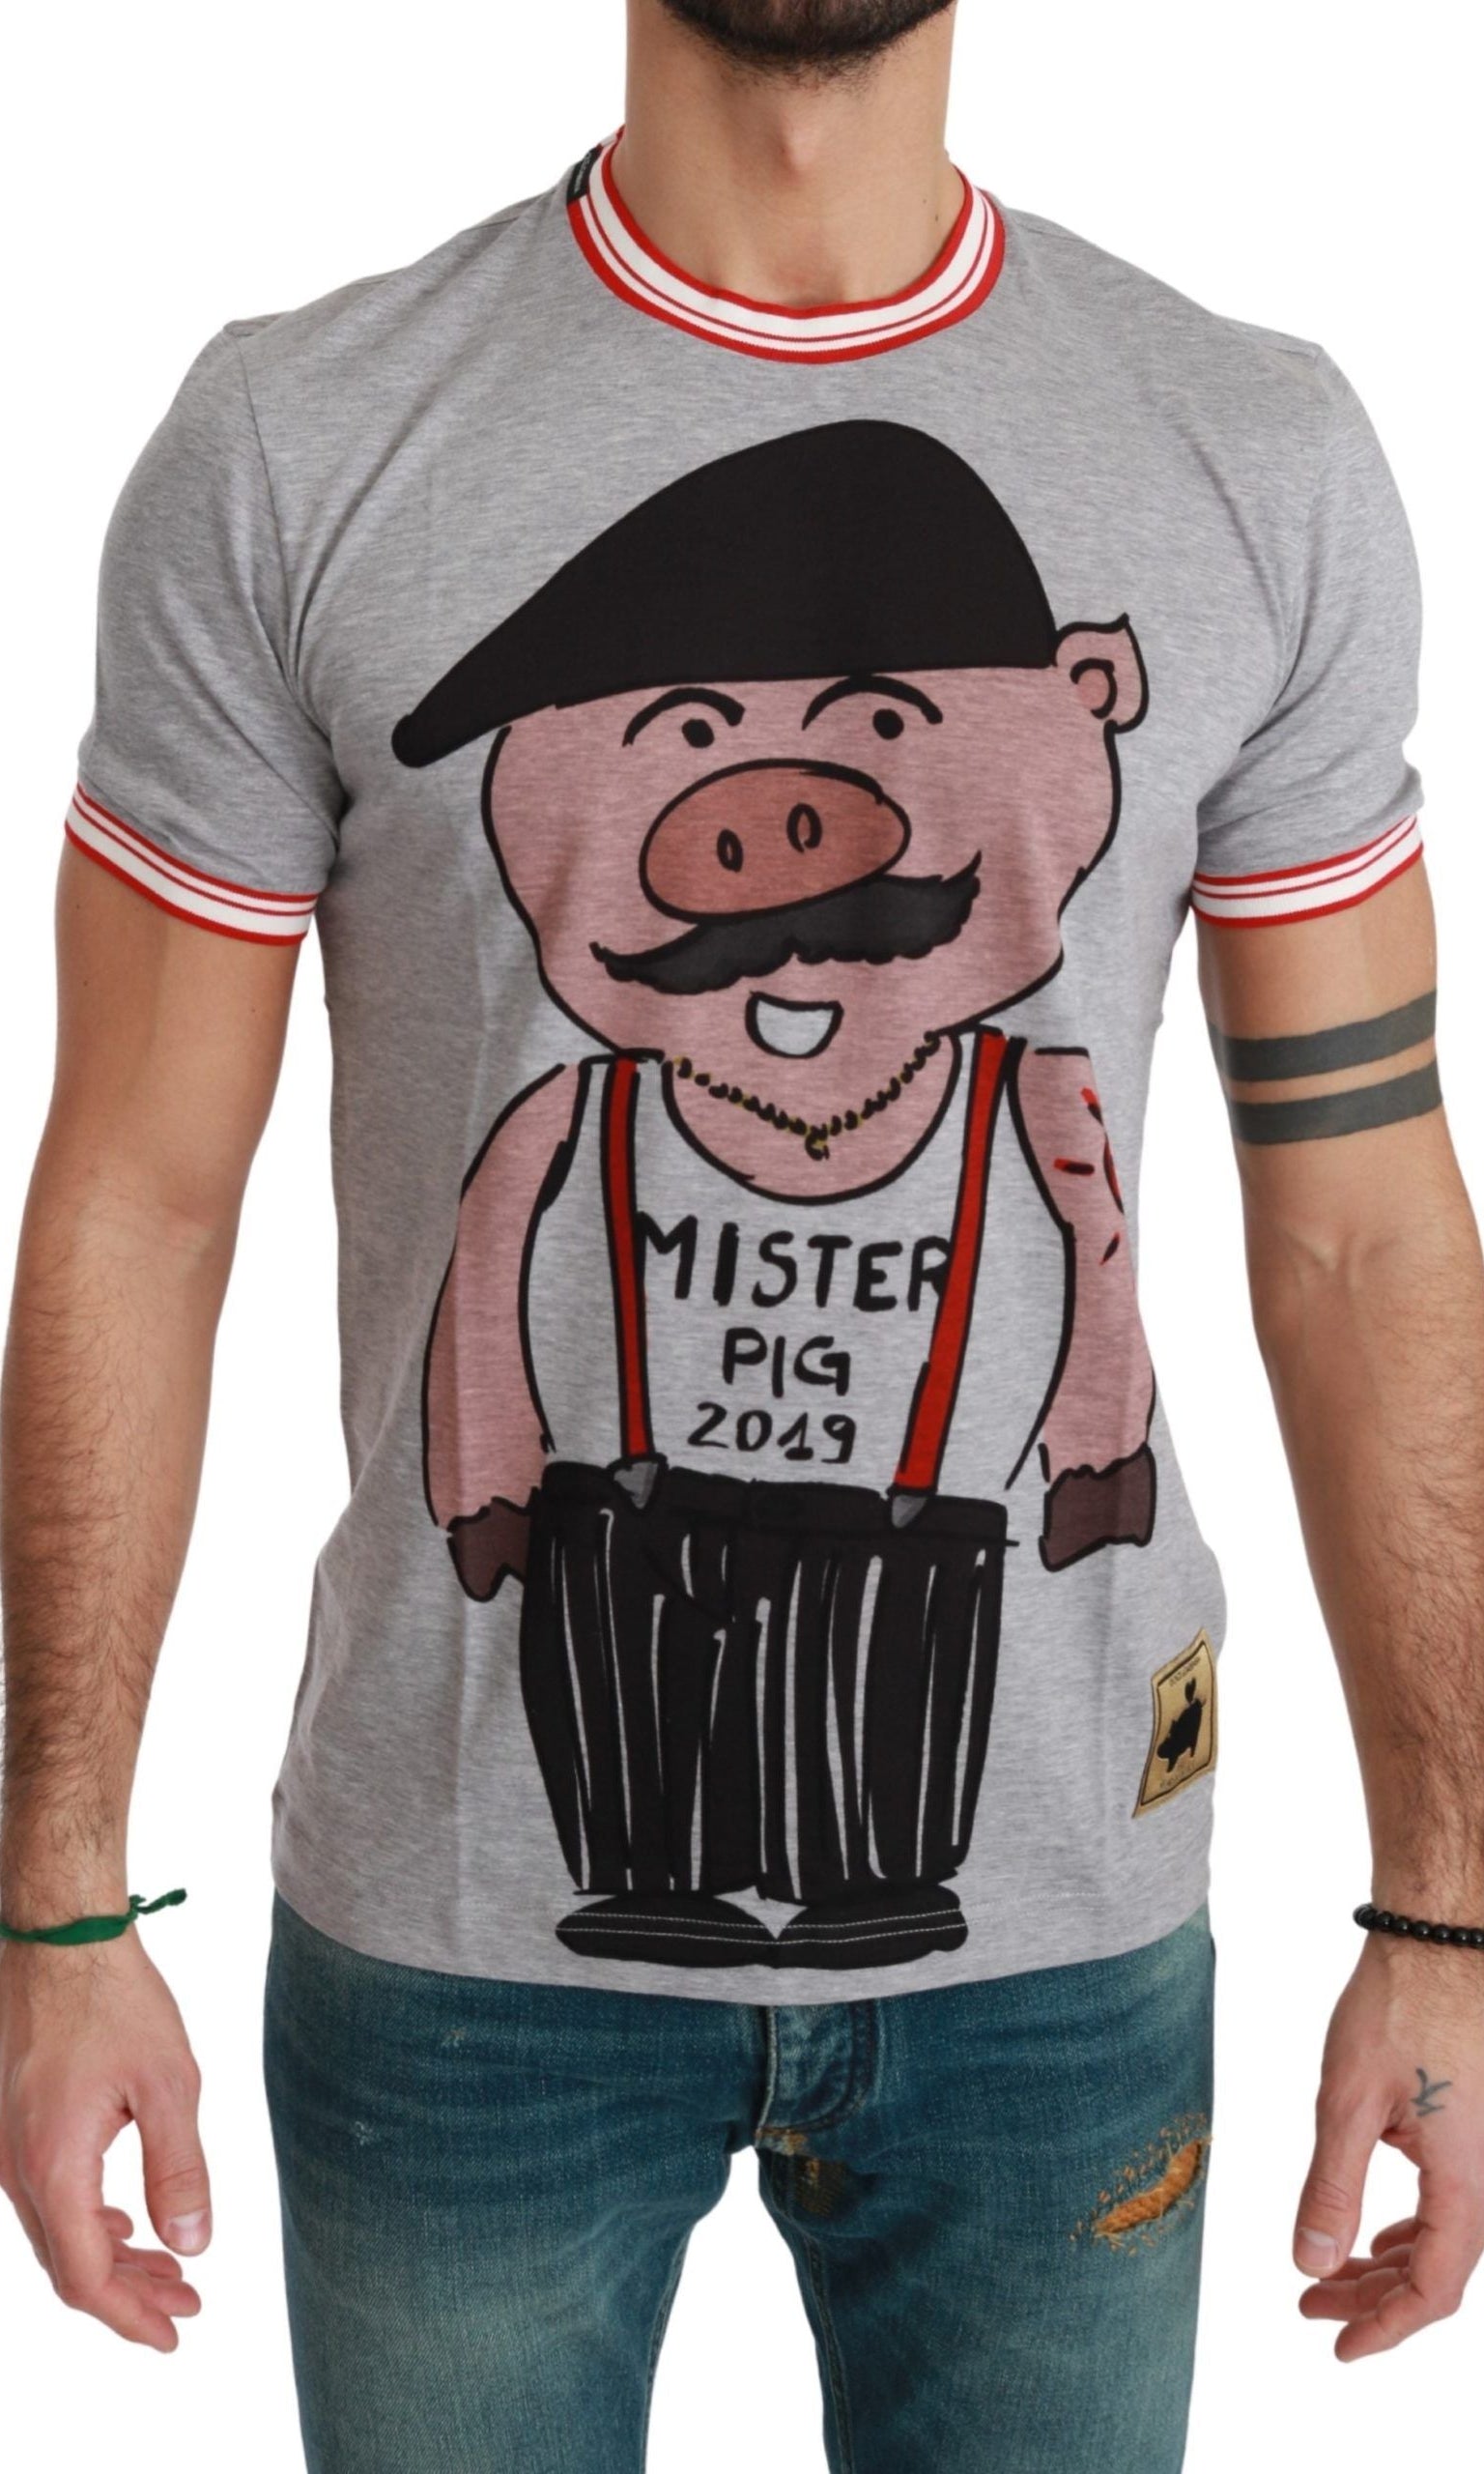 Dolce & Gabbana Gray Cotton Top 2019 Year of the Pig T-shirt GENUINE AUTHENTIC BRAND LLC